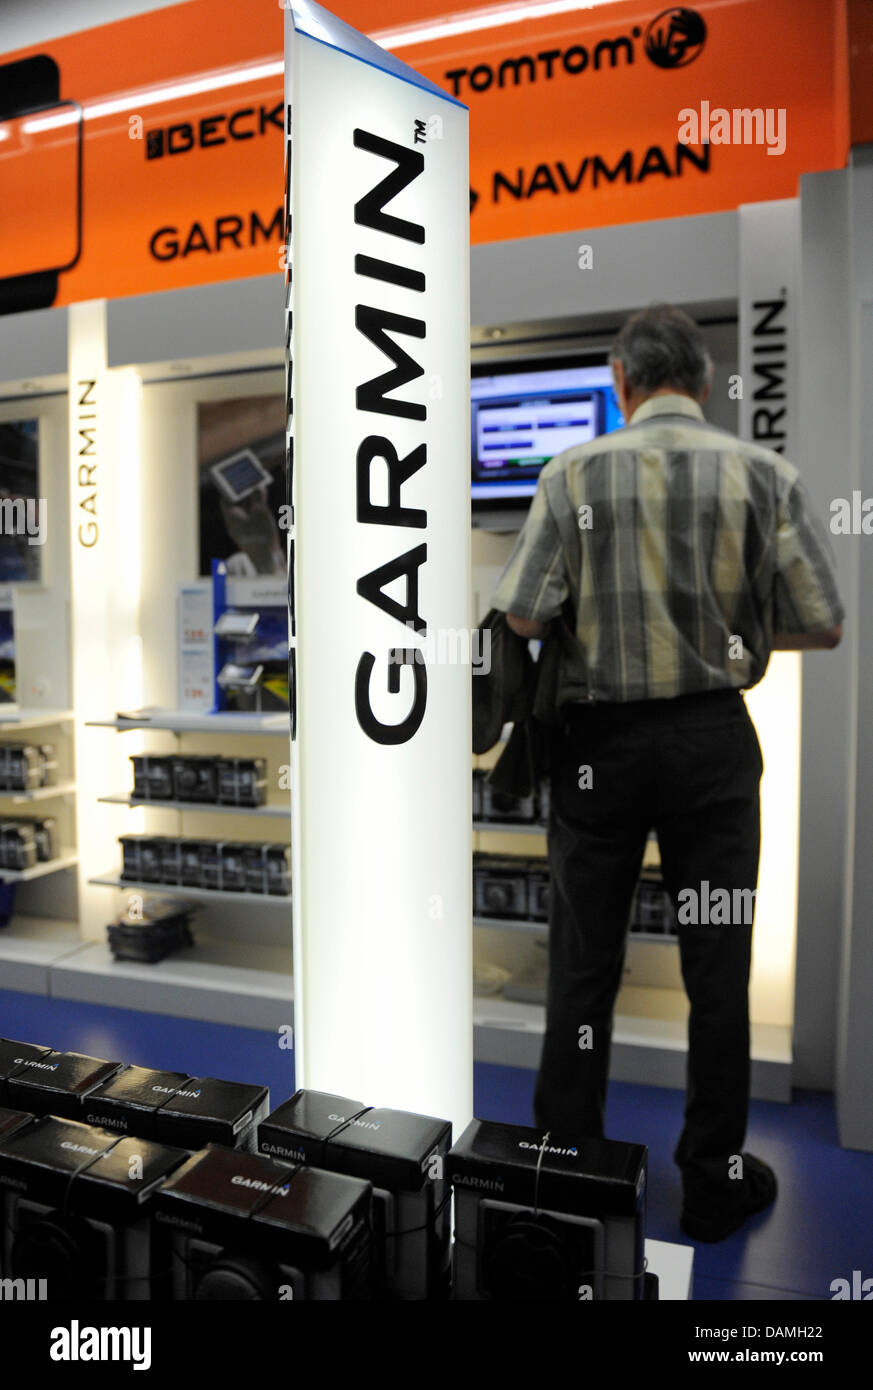 visitor to an electronic store stands behind the name of the American gps navigation device manufacturer Garmin in Munich, Germany, 15 June Market leader Garmin takes over the Hamburg